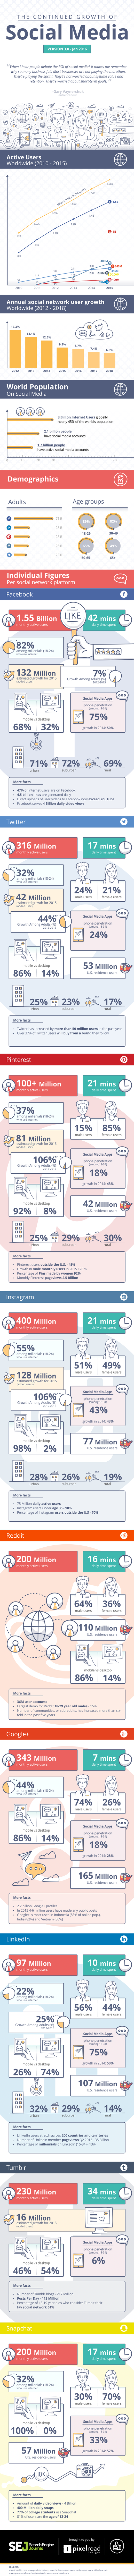 The Continued Growth of Social Media [Infographic] | SEJ